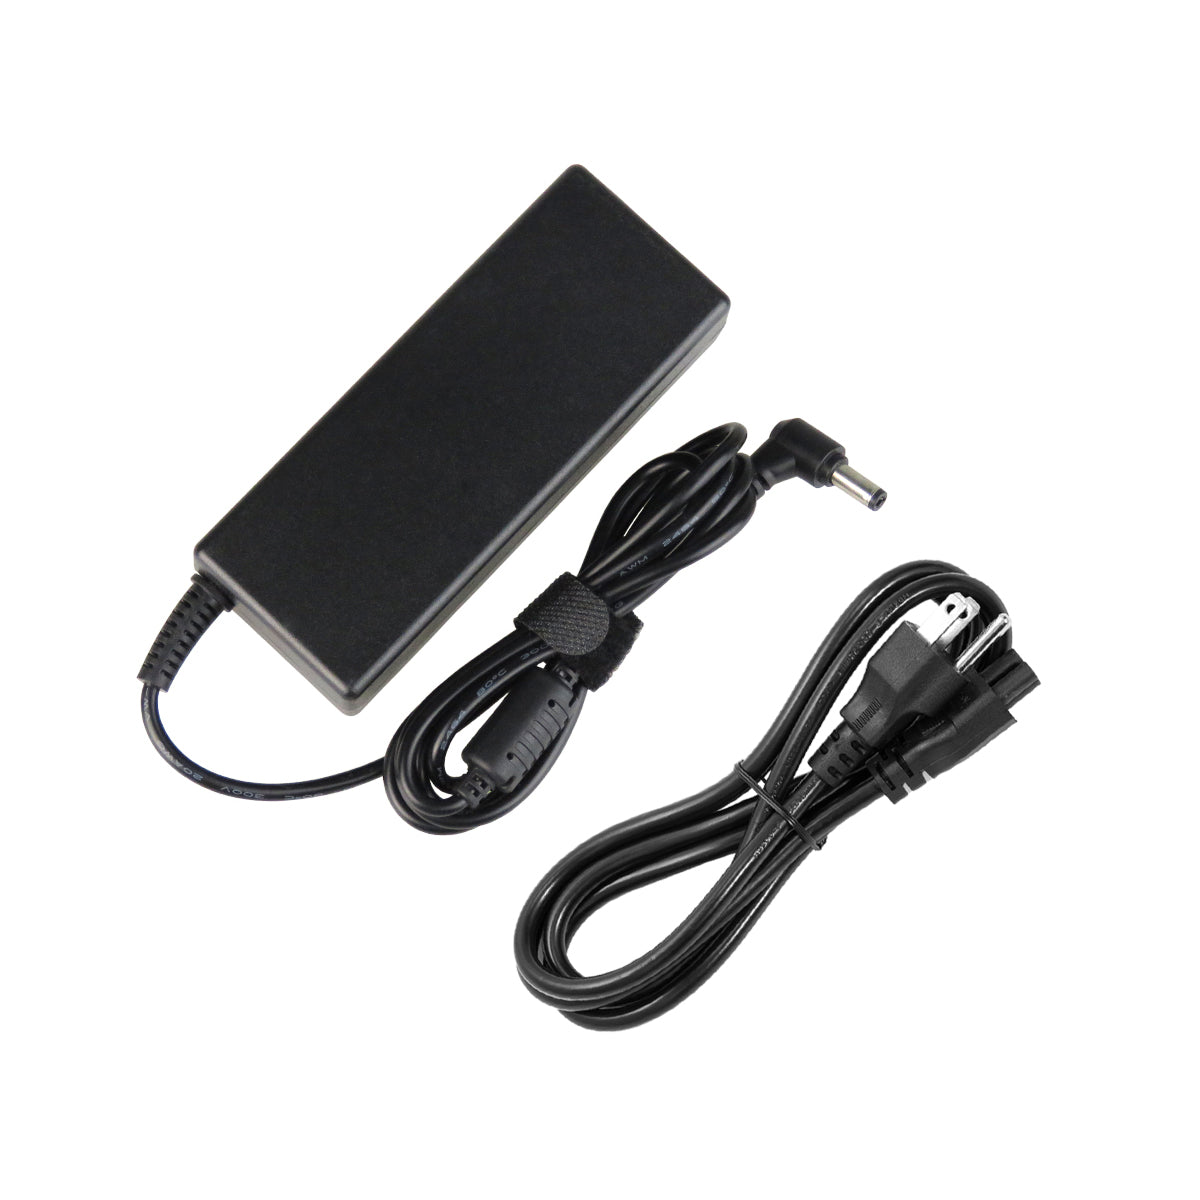 AC Adapter Charger for ASUS X56T Notebook.